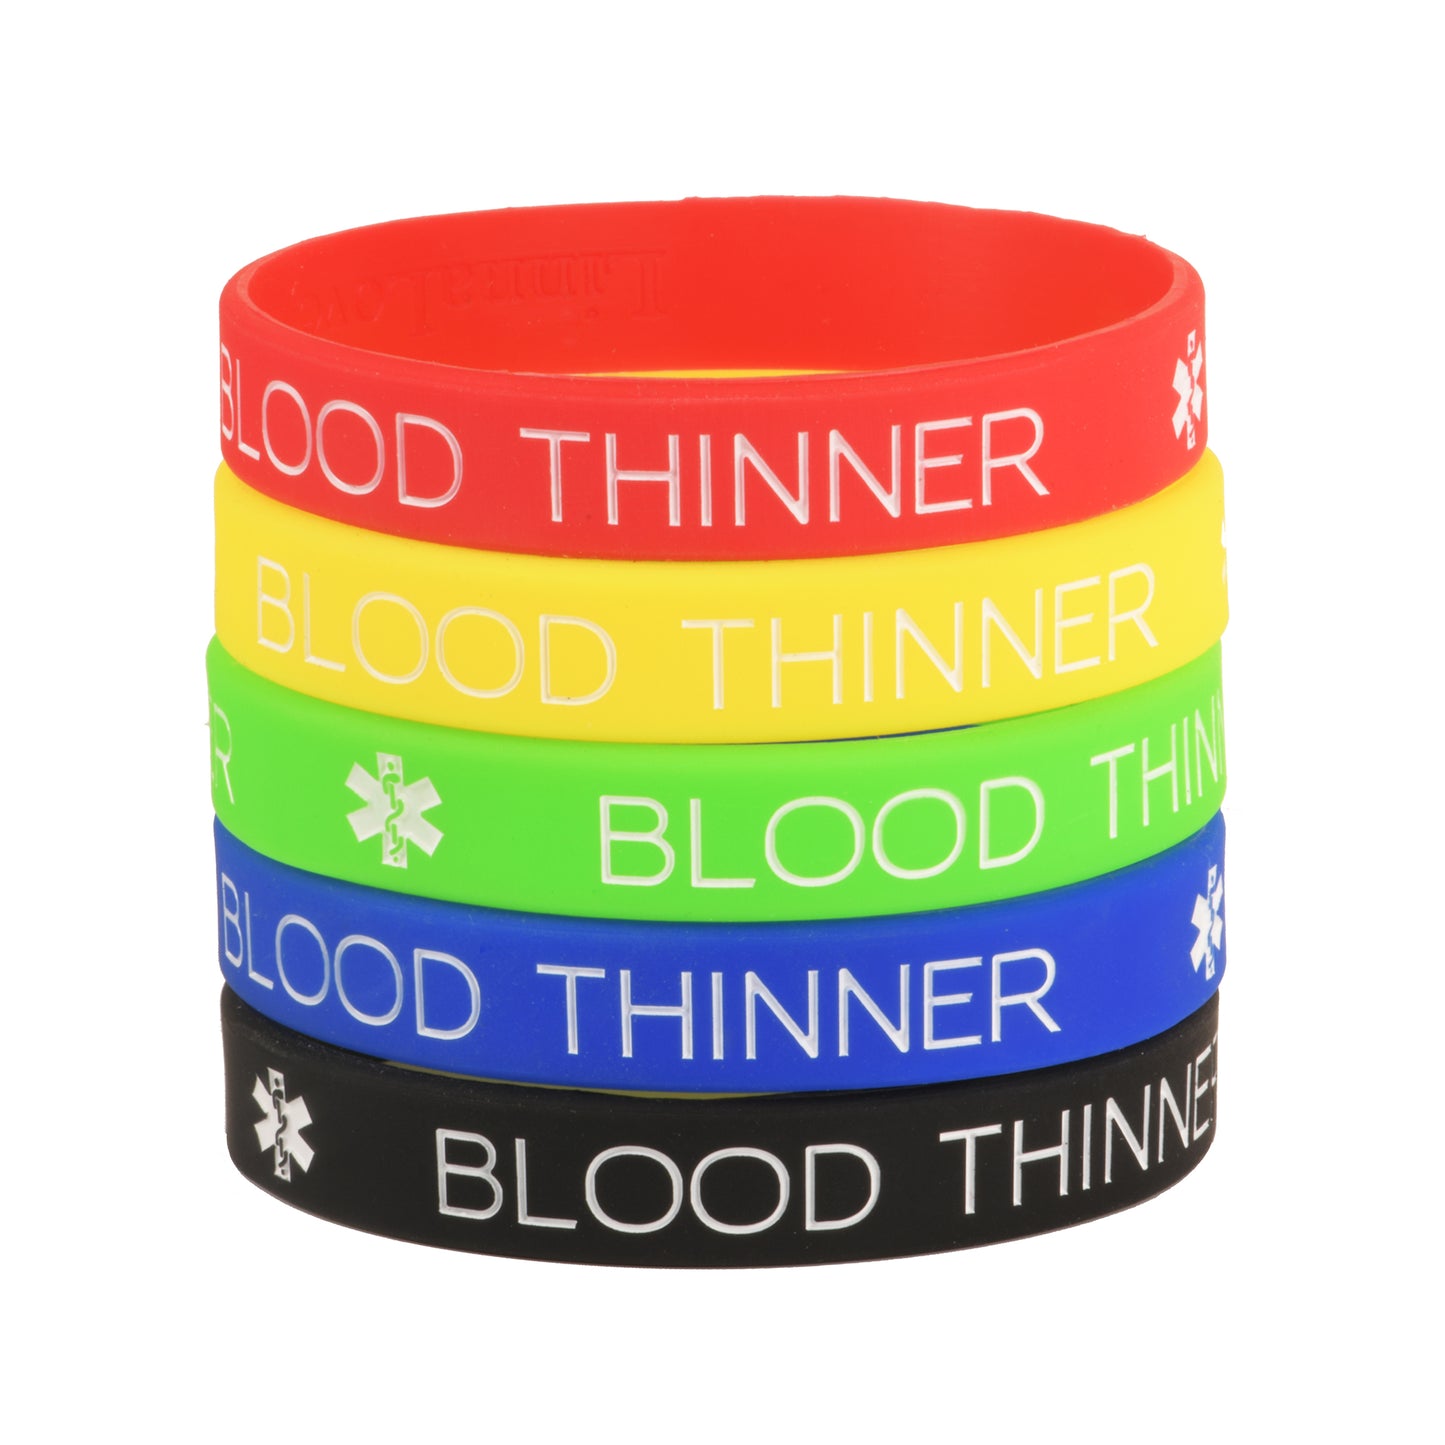 Blood Thinner Bracelets Silicone Medical Alert ID Wristbands (Pack of 5) One Size for All